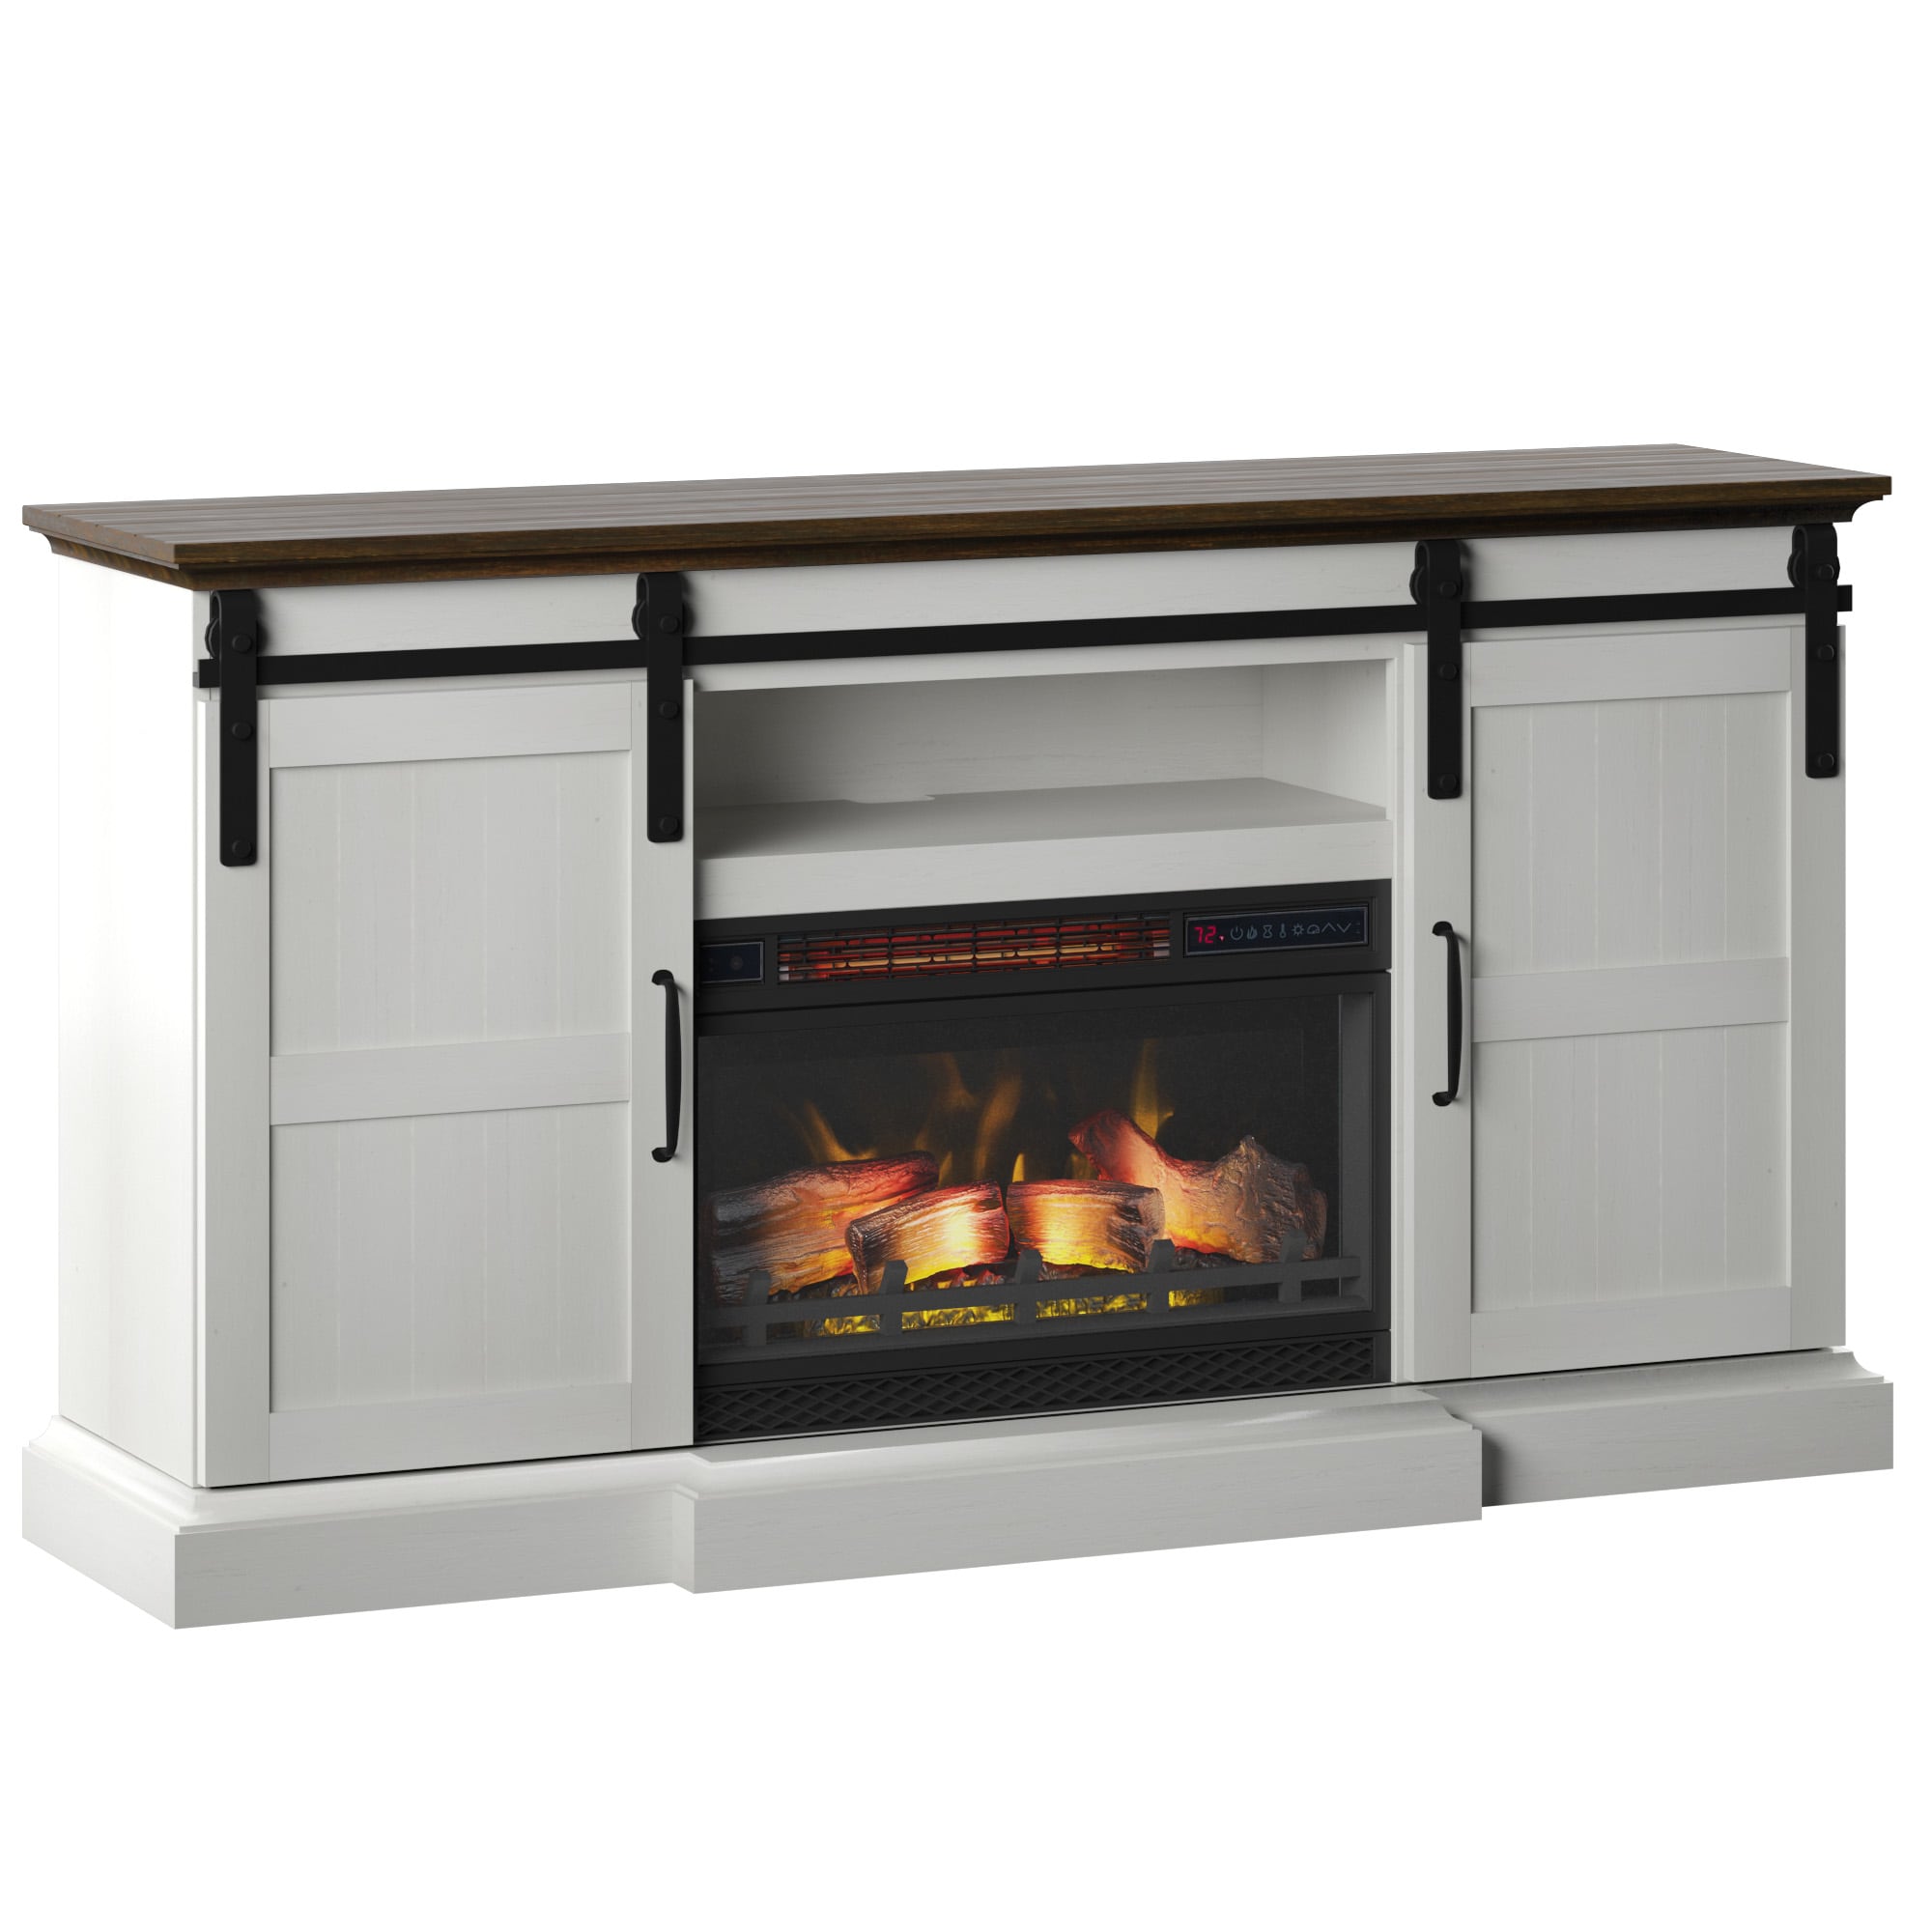 63-in W Old Wood White TV Stand with Infrared Quartz Electric Fireplace | - ClassicFlame 26MM90474-TPG03S